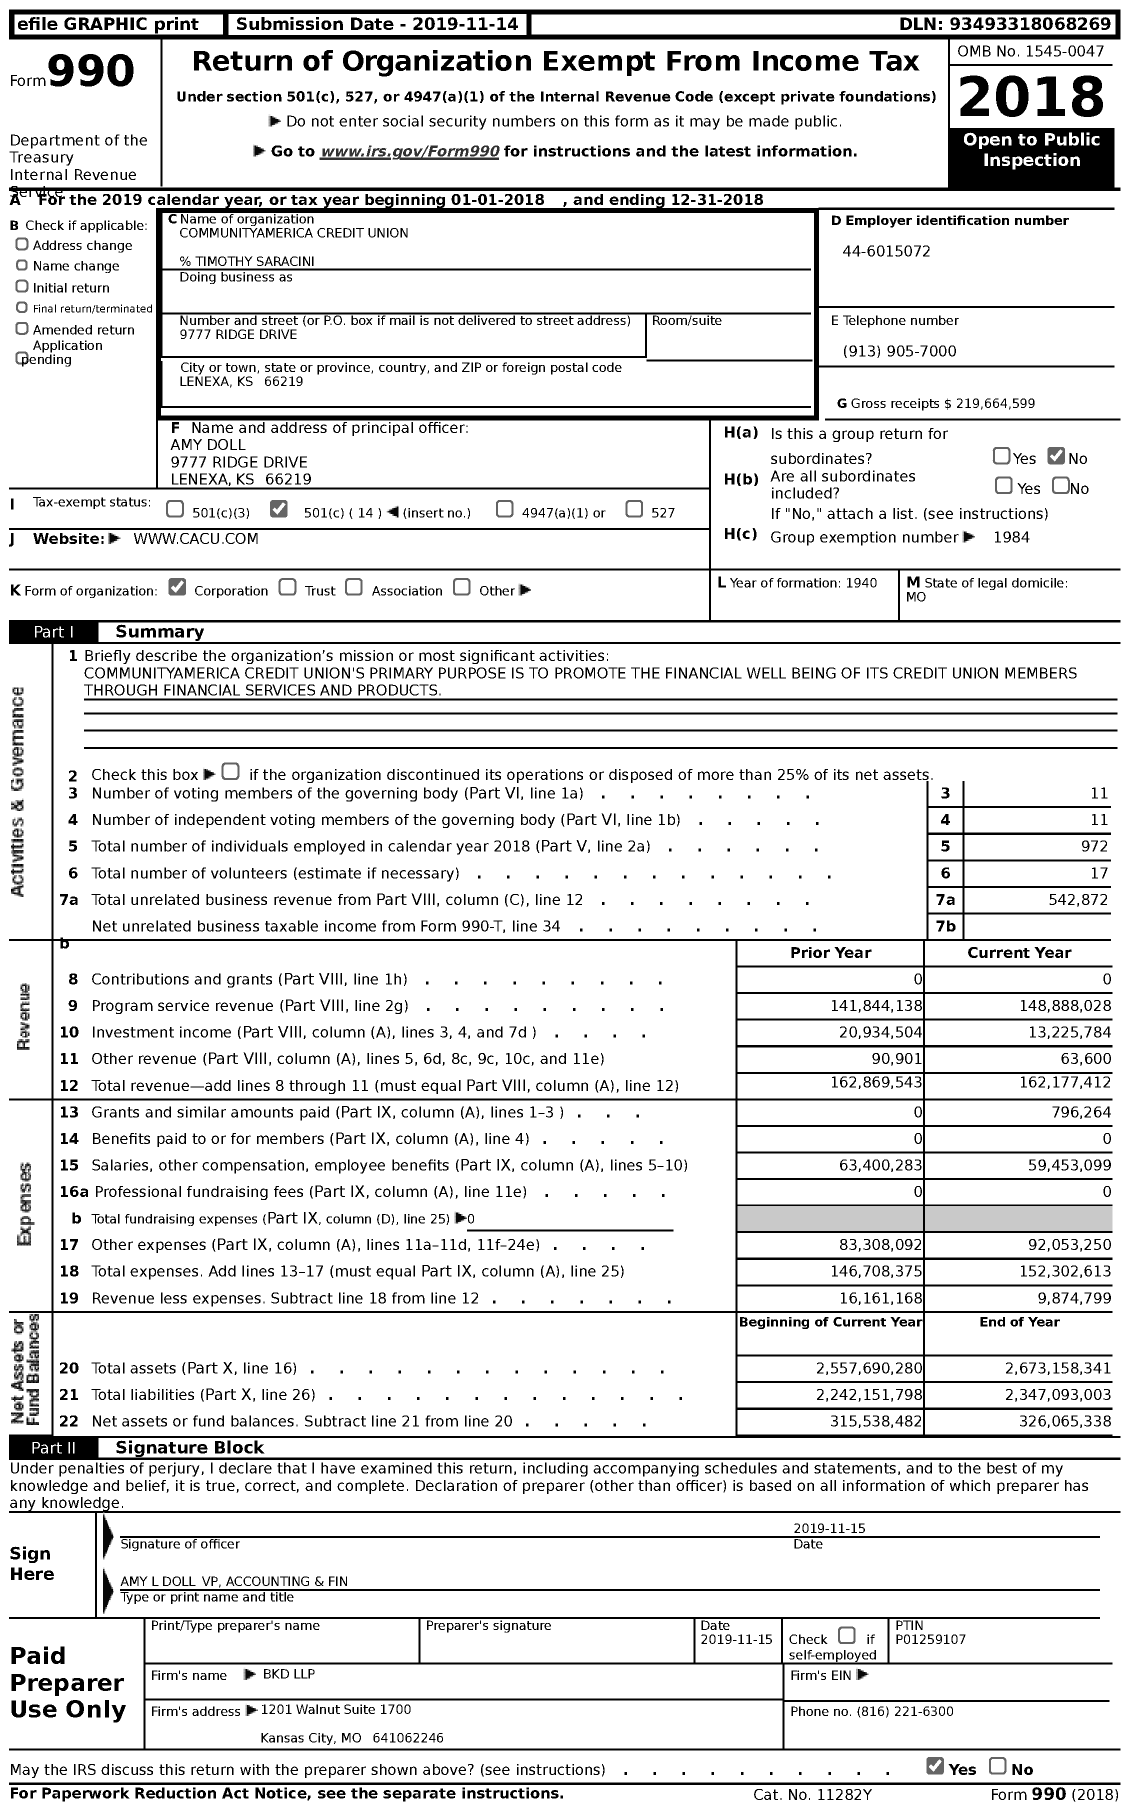 Image of first page of 2018 Form 990 for Communityamerica Credit Union